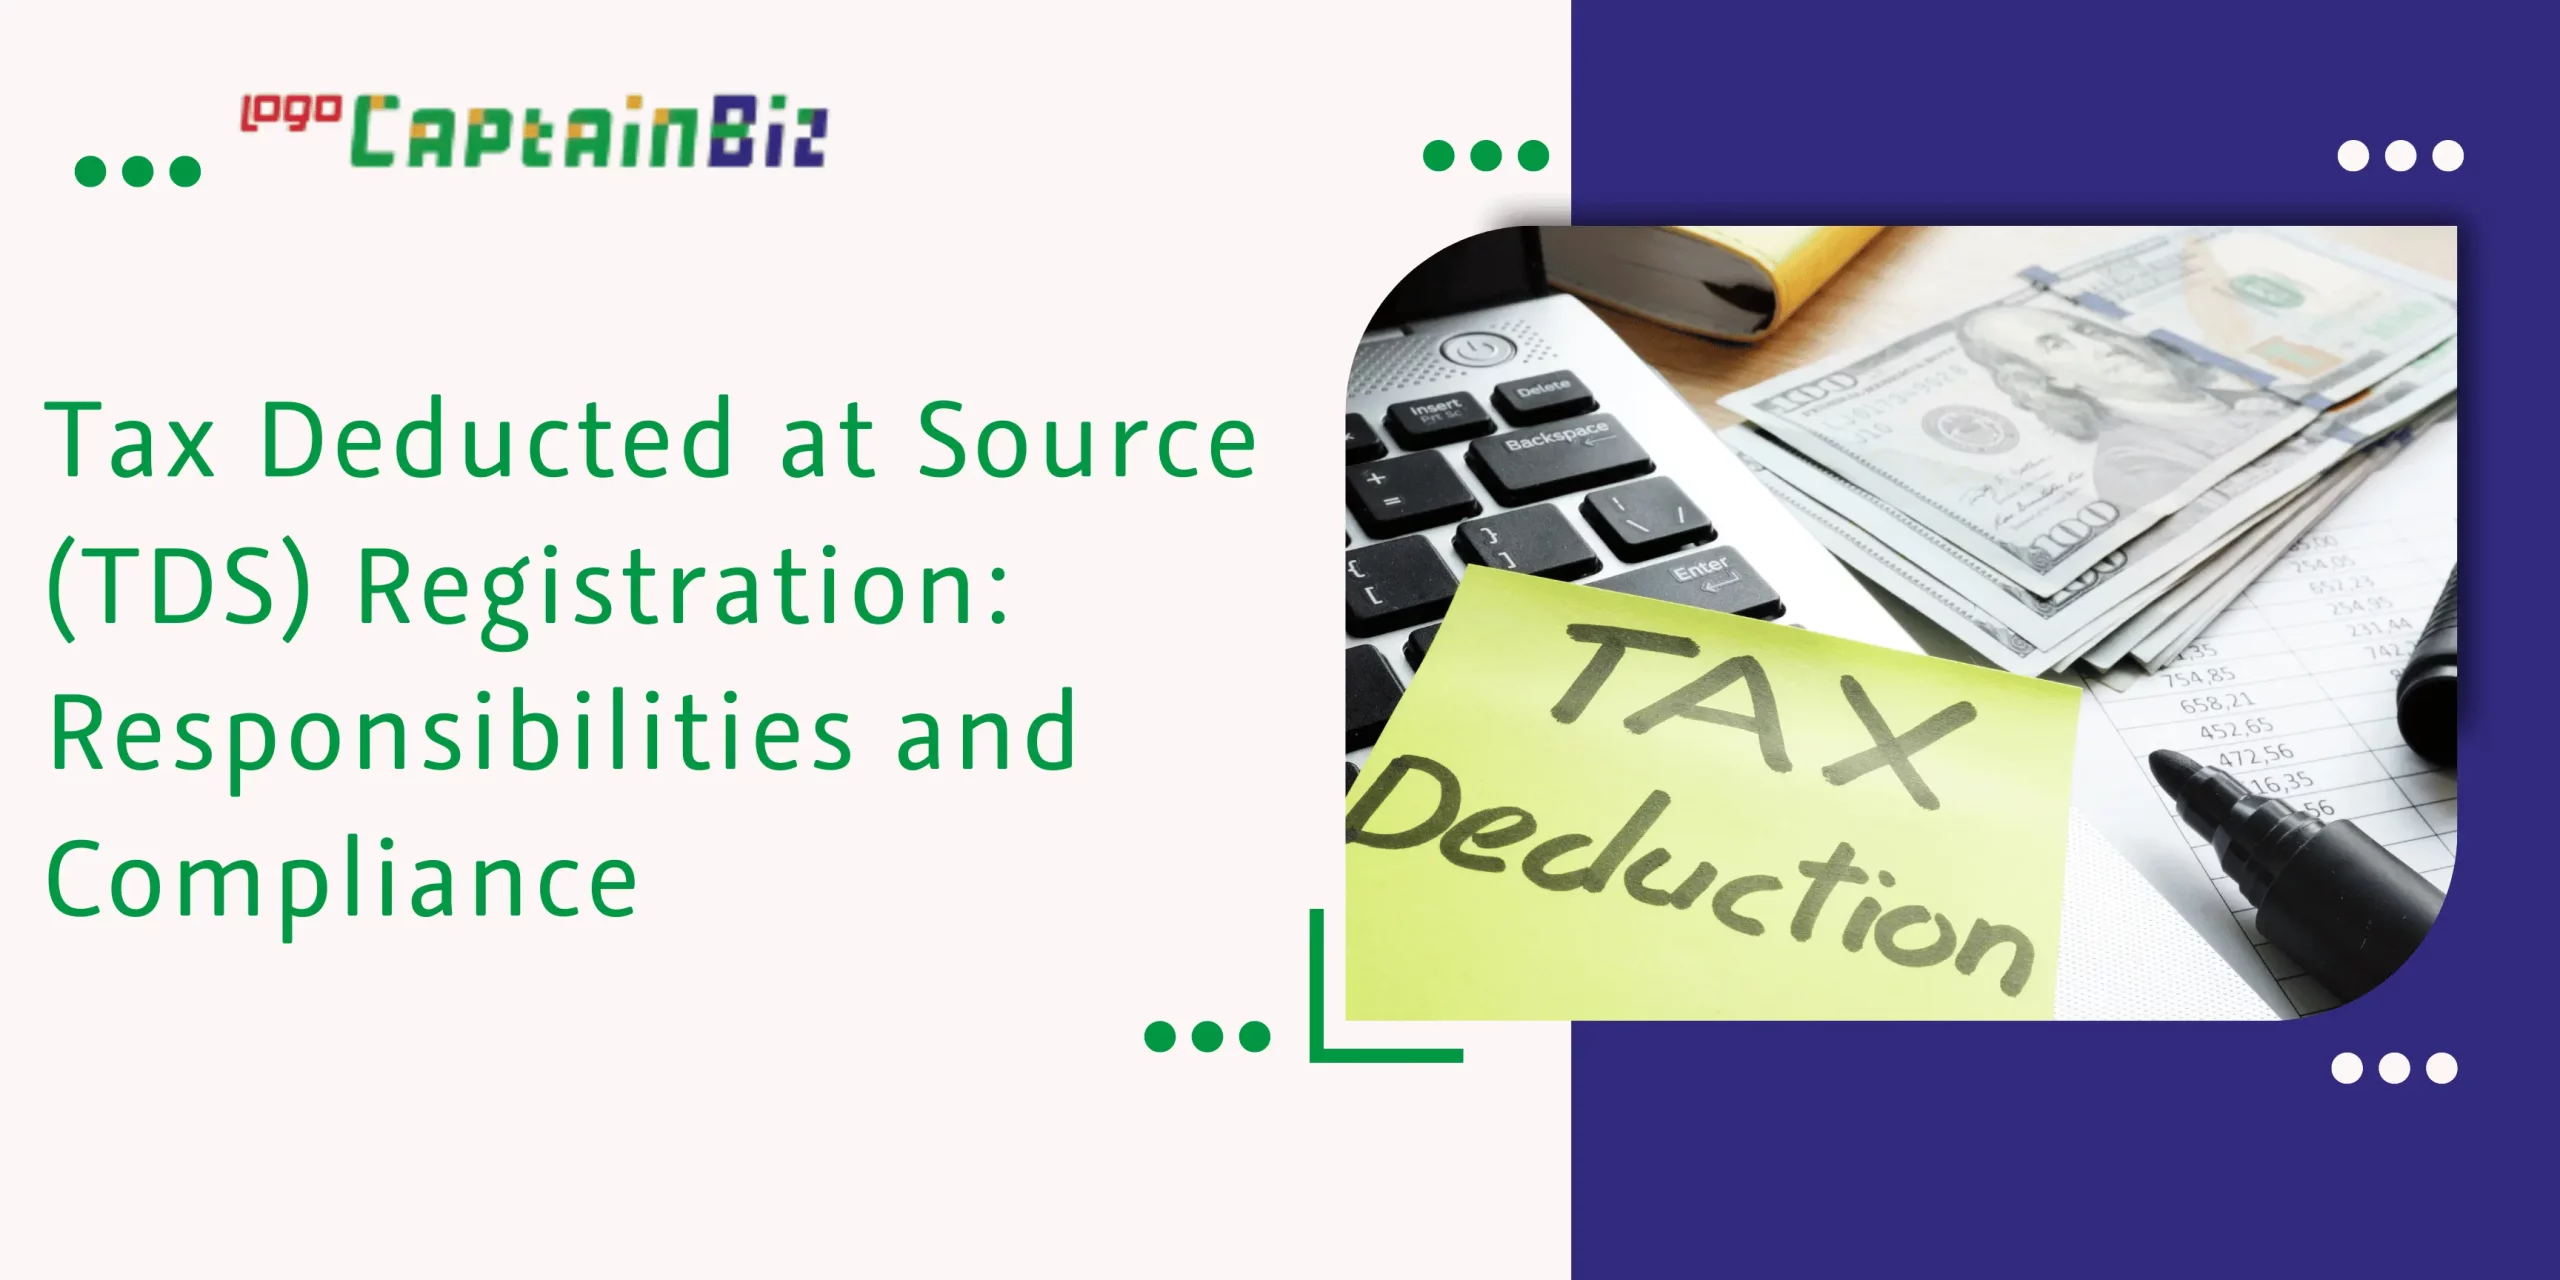 CaptainBiz: tax deducted at source (tds) registration: responsibilities and compliance